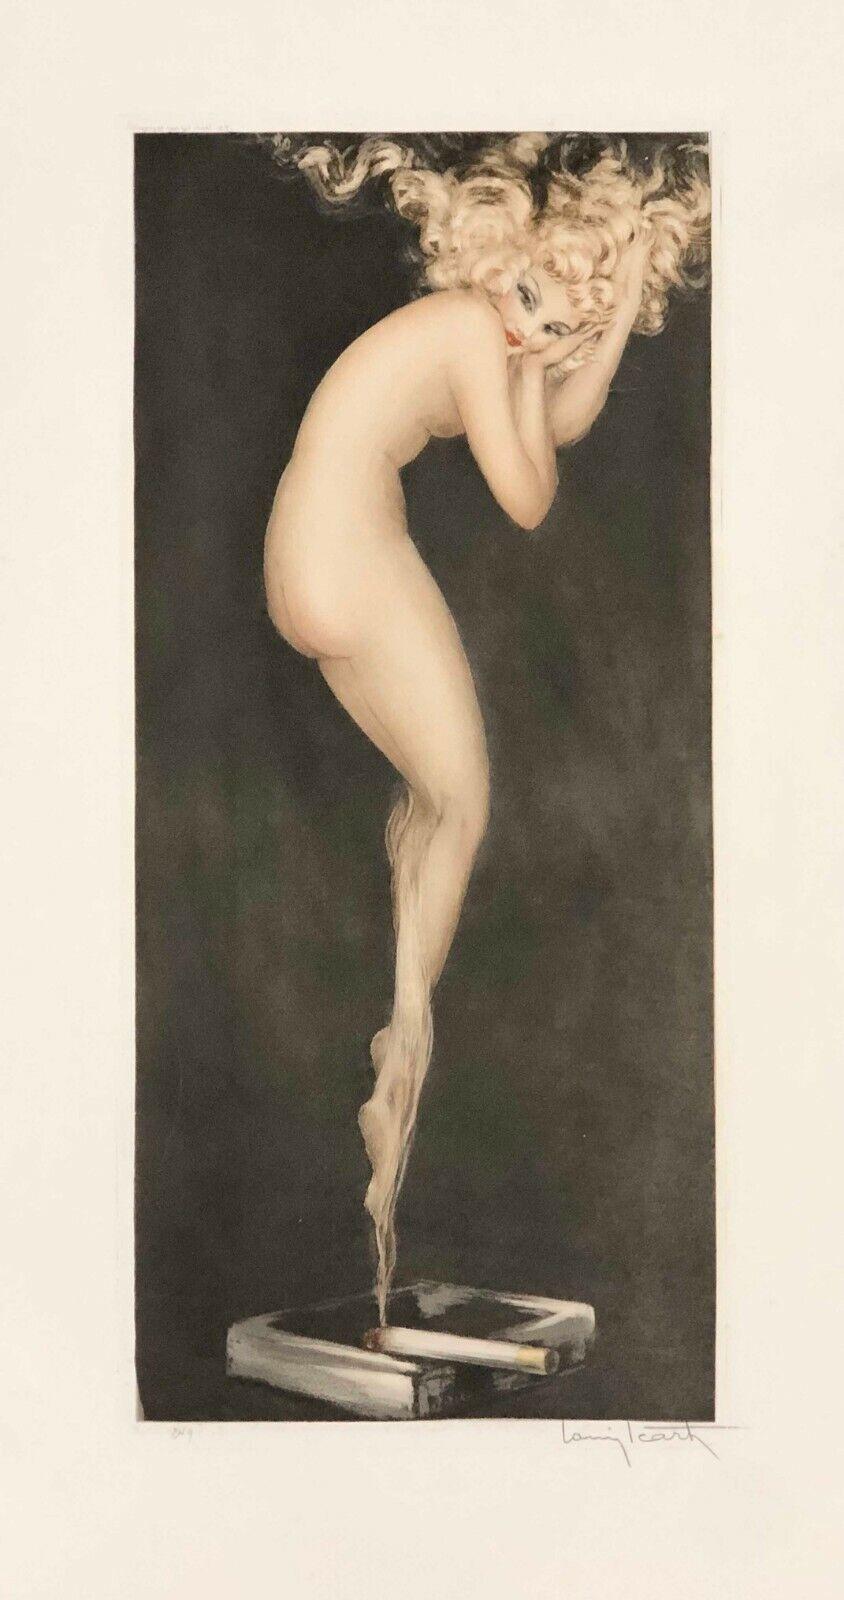 Illusion- Original etching with hand watercolor from 1940 - Print by Louis Icart